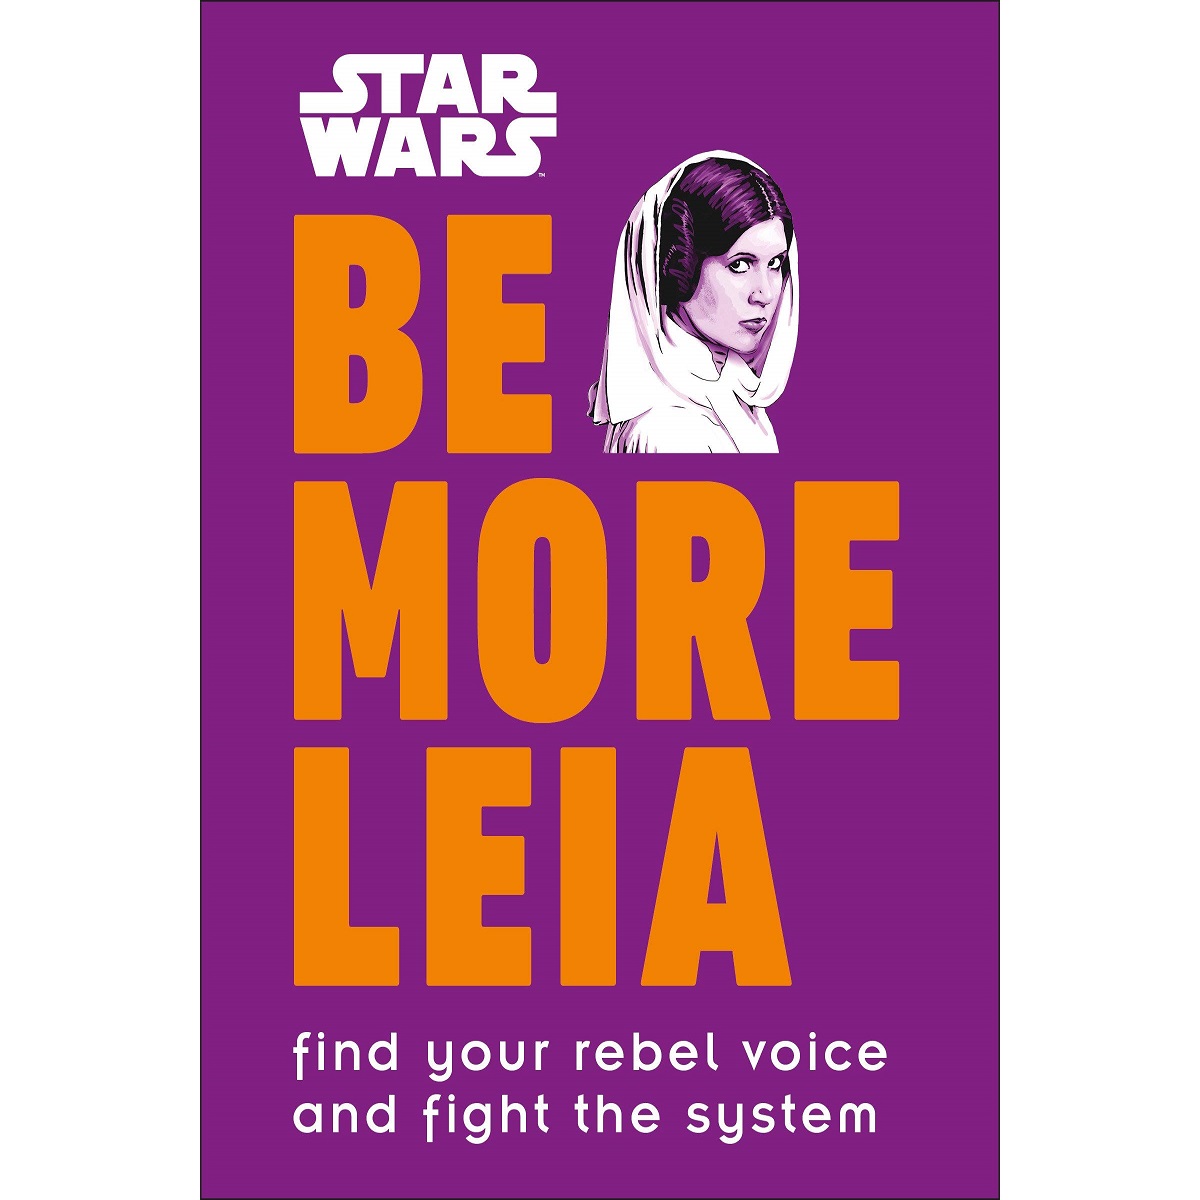 Star Wars Be More Leia: Find Your Rebel Voice and Fight the System by D.K. Publishing